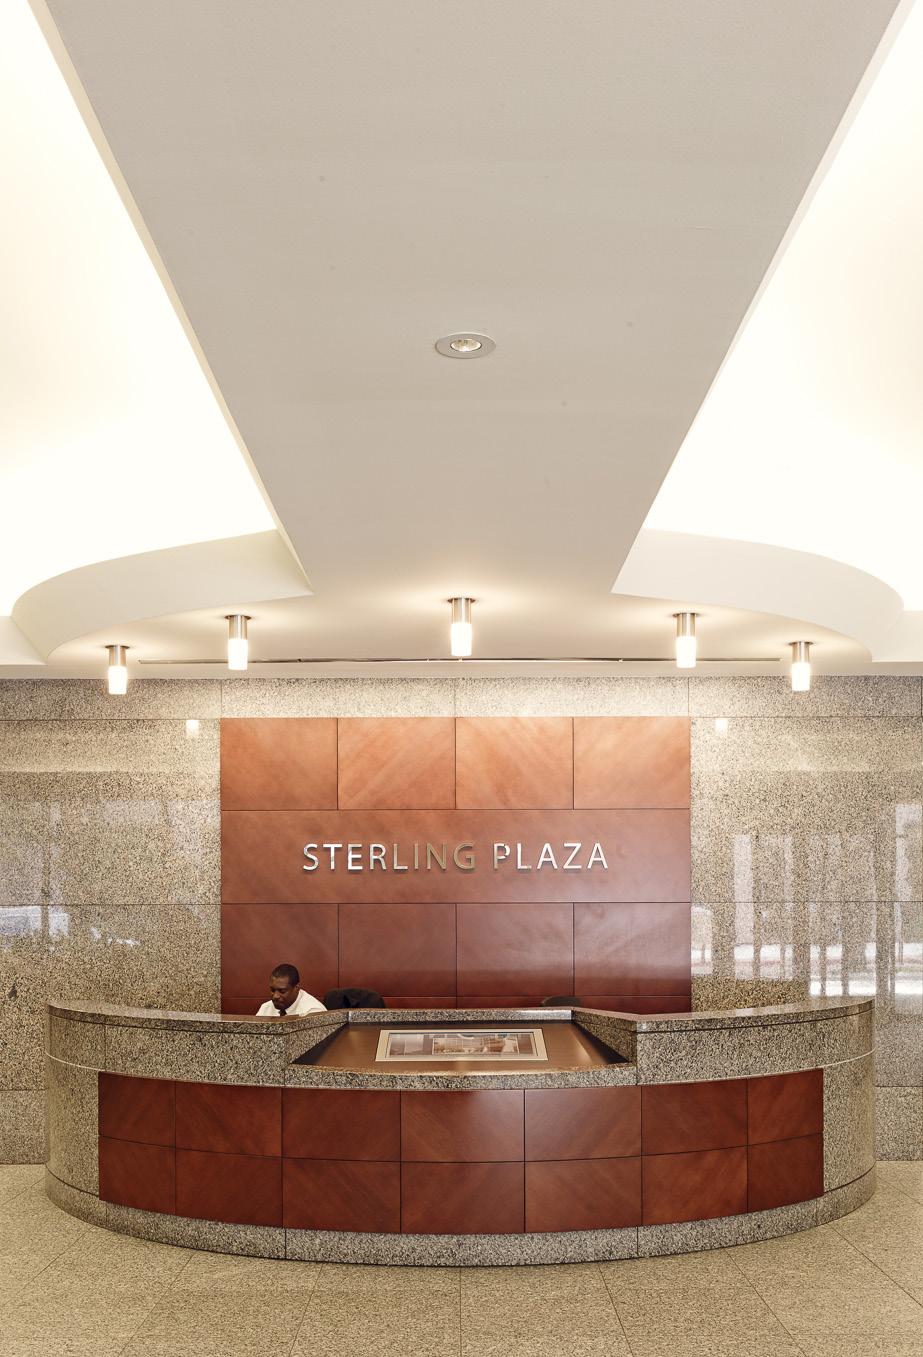 8 ON-SITE AMENITIES Sterling Plaza boasts an extensive set of both business and personal amenities for tenants seeking an extraordinary office experience.